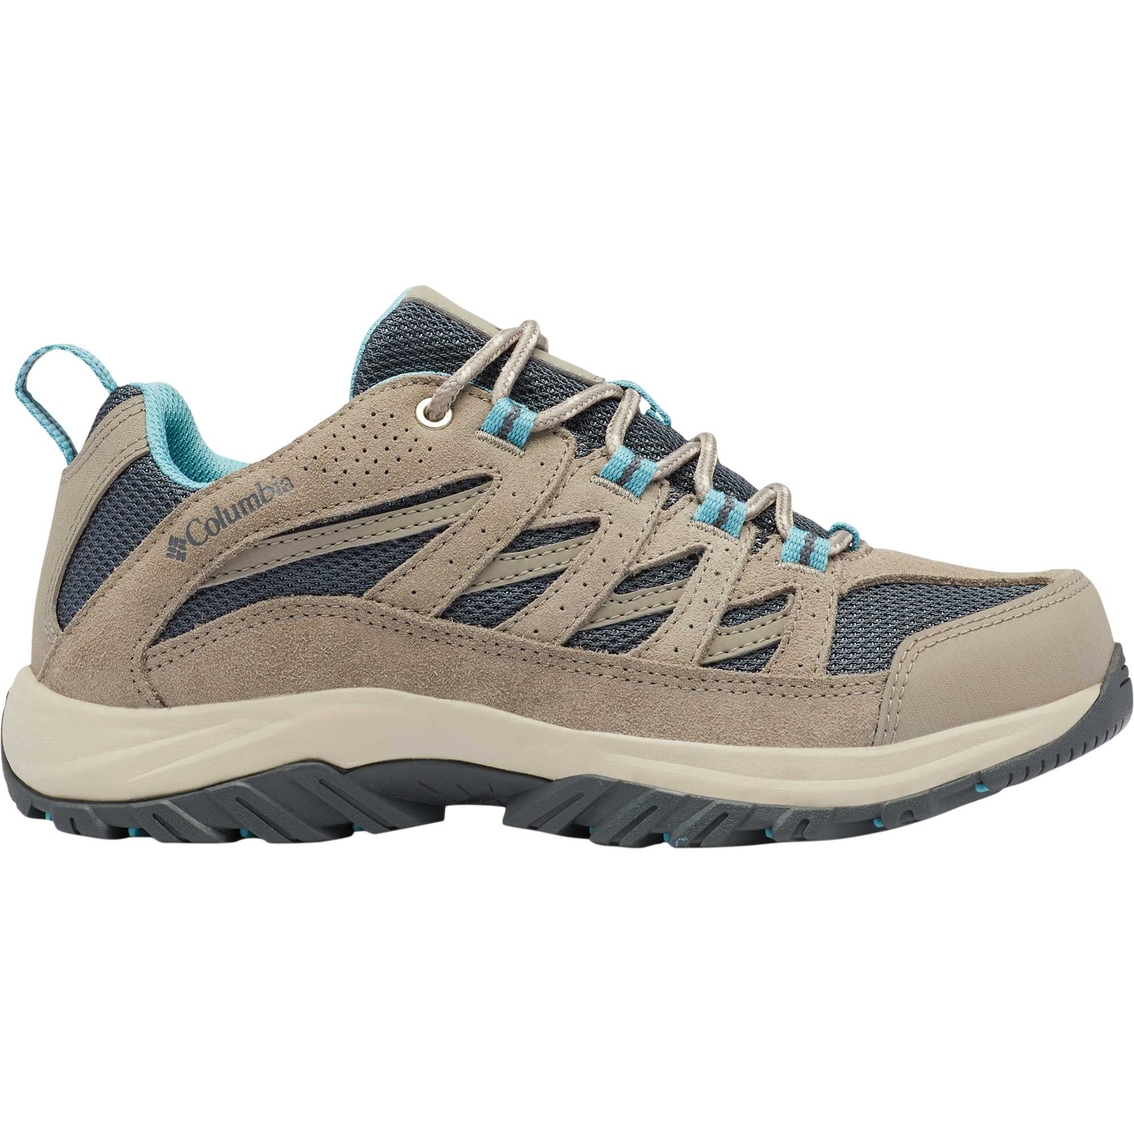 Columbia Women's Crestwood Hiking Boots - Image 2 of 9